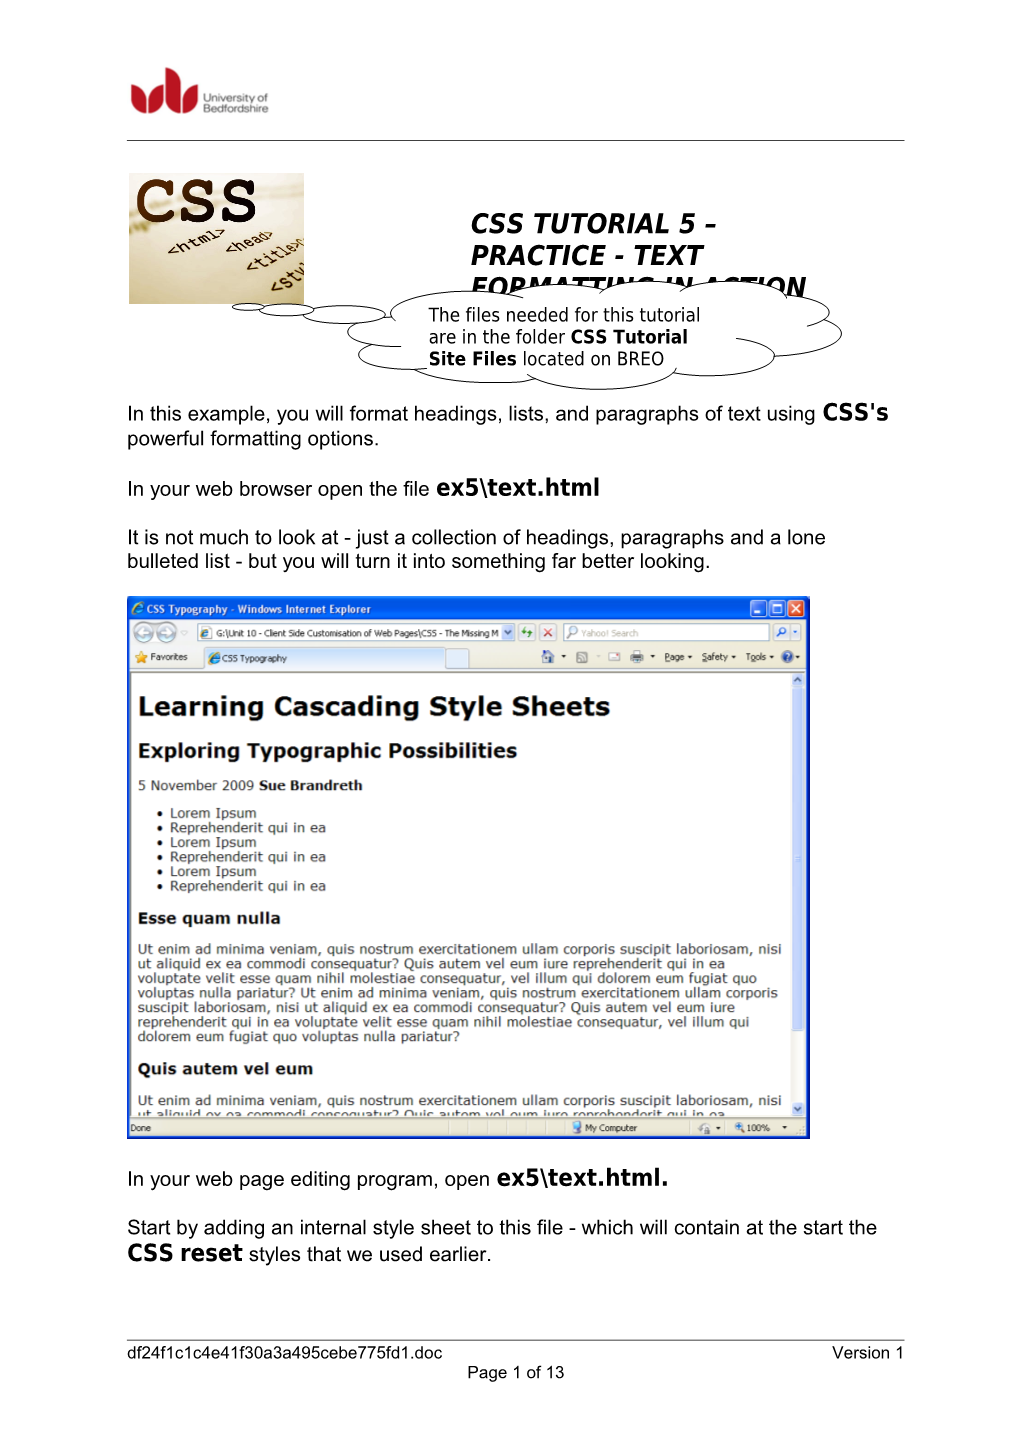 Css Tutorial 5 Practice - Text Formatting in Action